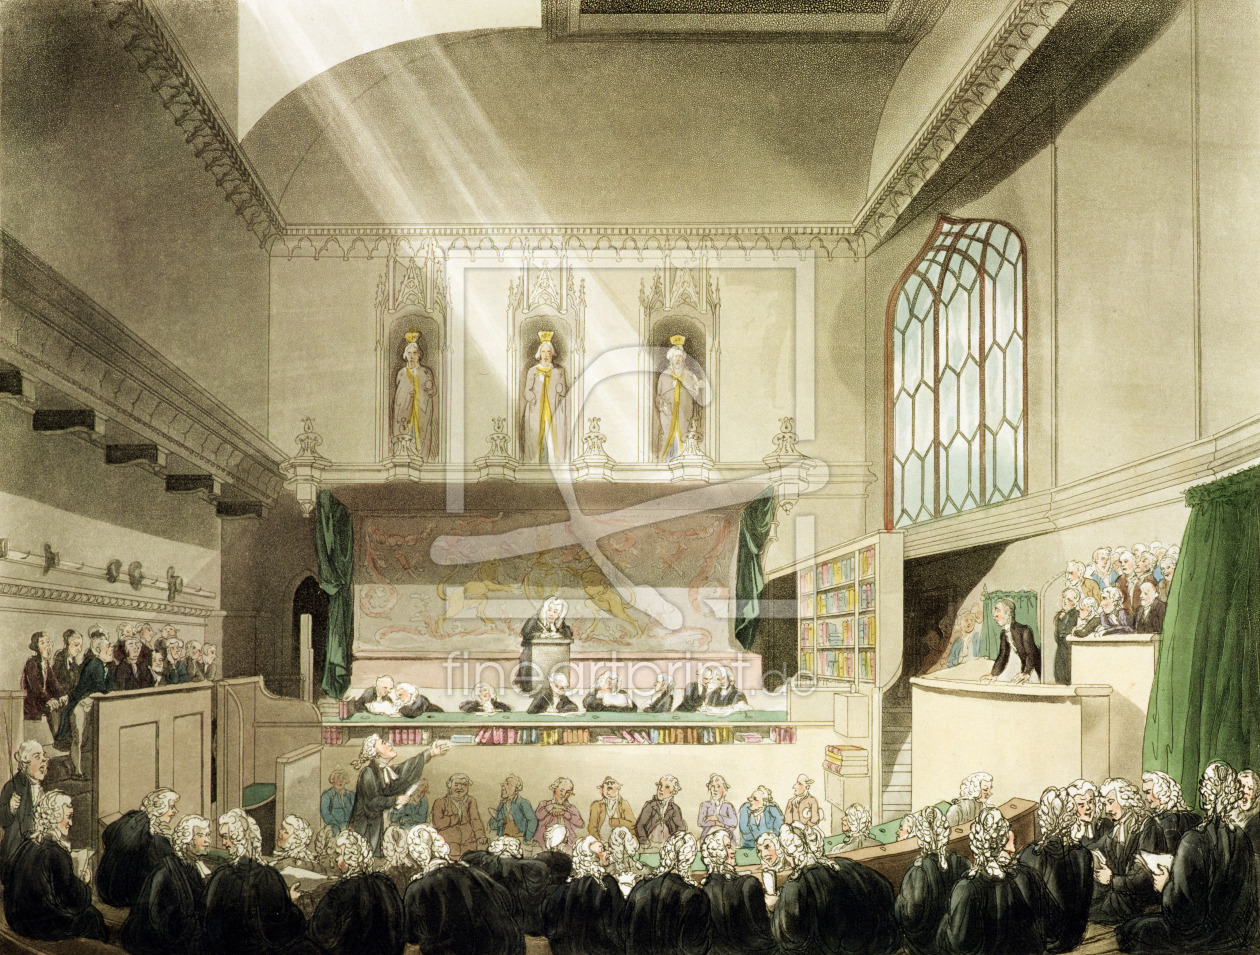 Bild-Nr.: 31002637 Court of King's Bench, Westminster Hall, from 'The Microcosm of London', engrave erstellt von Rowlandson, Thomas